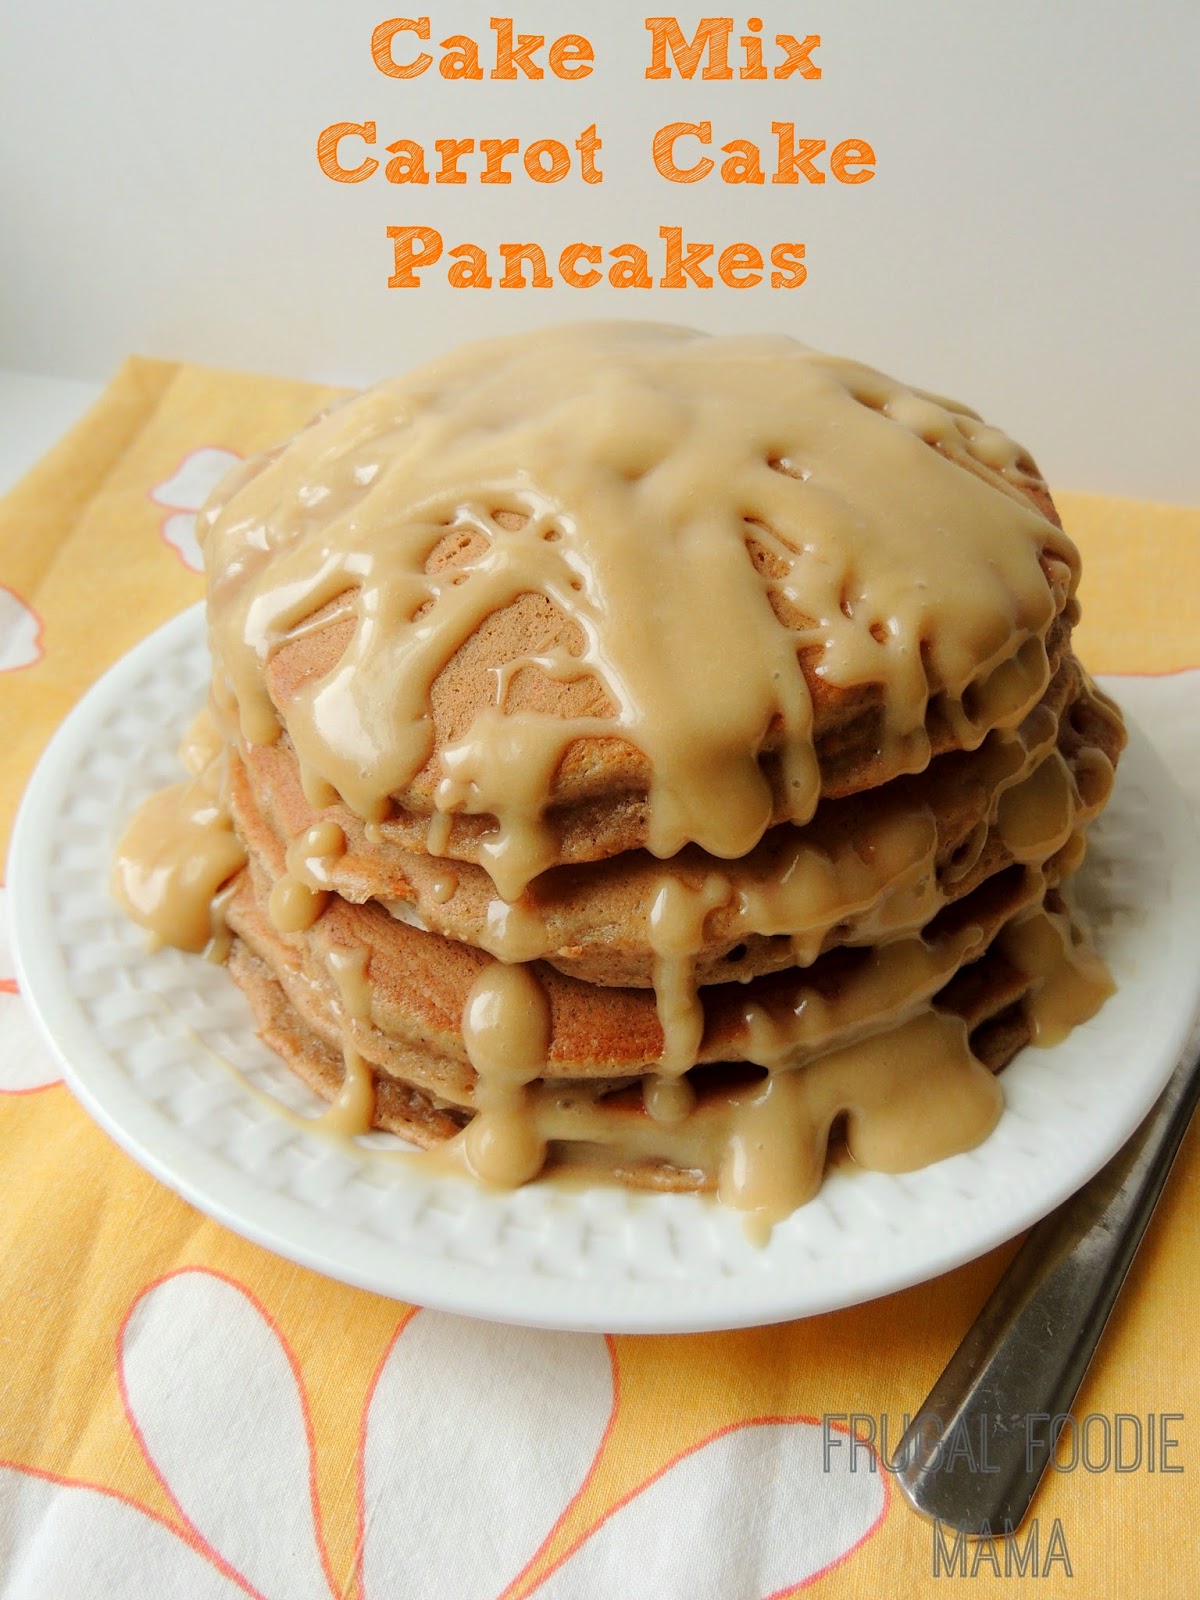 Who says you can't have cake for breakfast? ;) These carrot cake pancakes come together super quick with the help of a boxed mix, leaving you plenty of time to whip up the decadent Biscoff cream cheese glaze to pour over top of these.